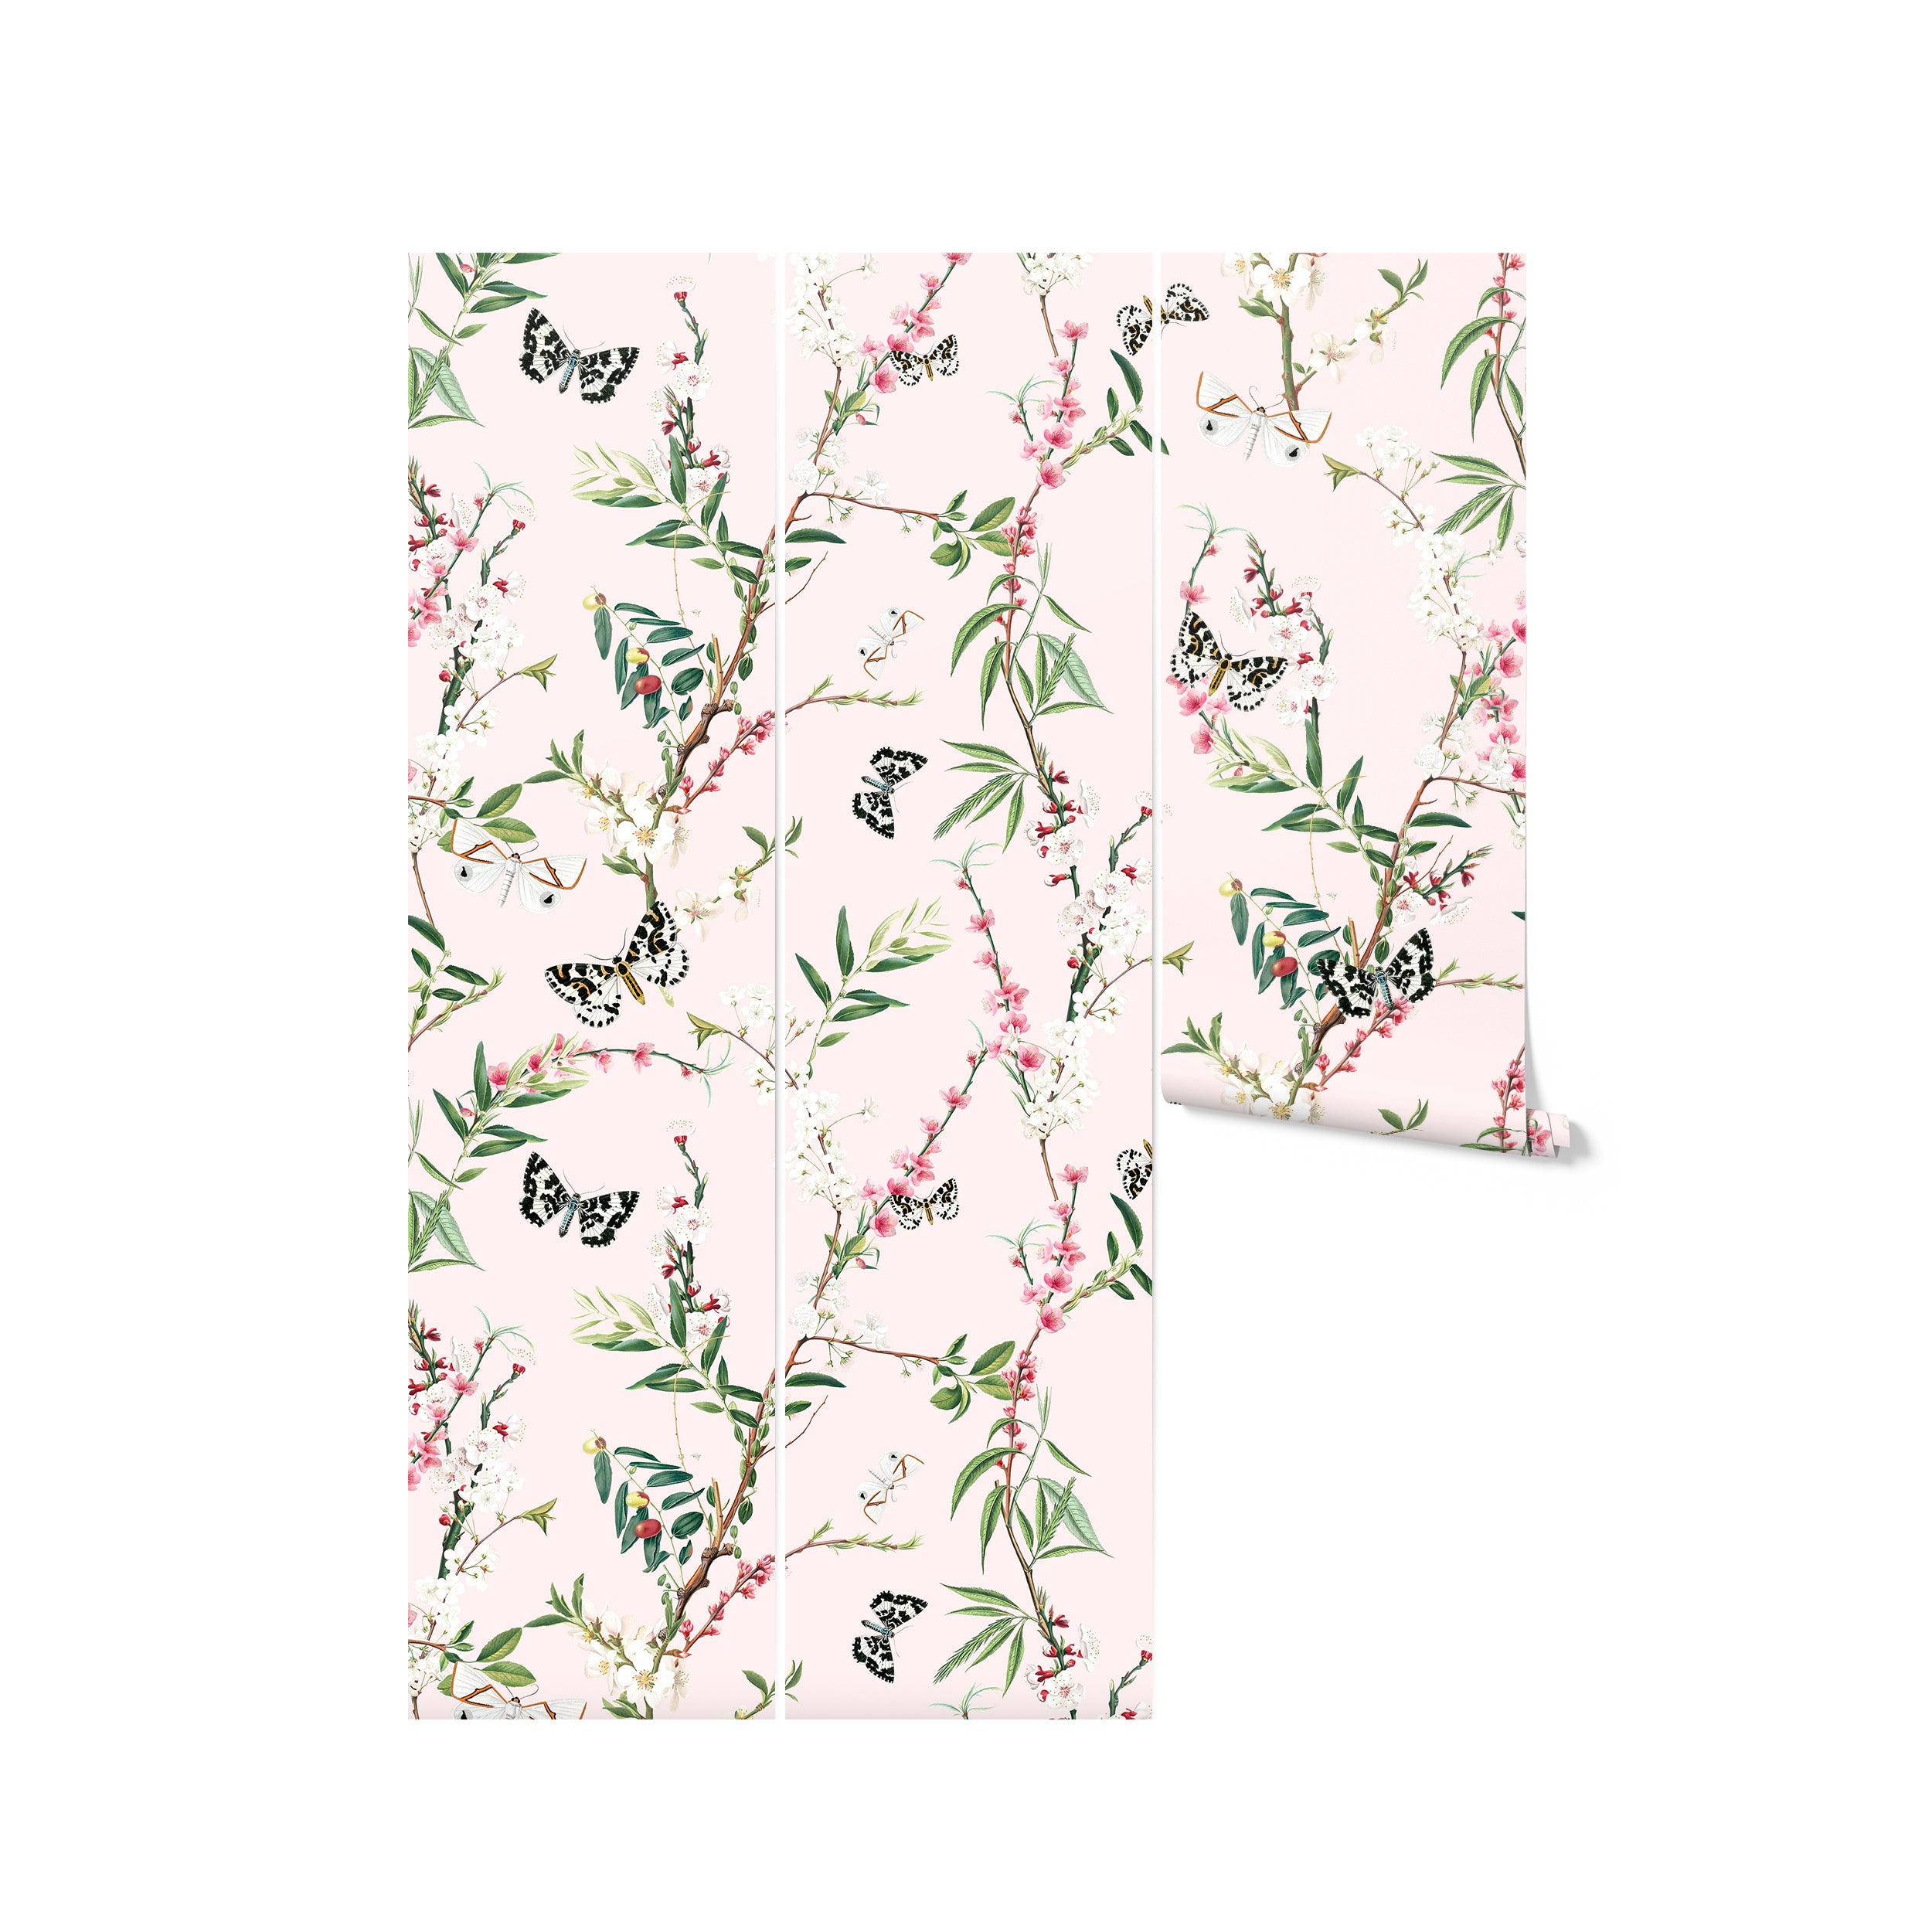 A roll of Enchanting Butterflies Wallpaper displayed upright, highlighting its intricate pattern of butterflies and blooming branches on a soft pink background. This wallpaper is perfect for adding a touch of nature and whimsy to any room, making it an ideal choice for nurseries, bedrooms, or playrooms.